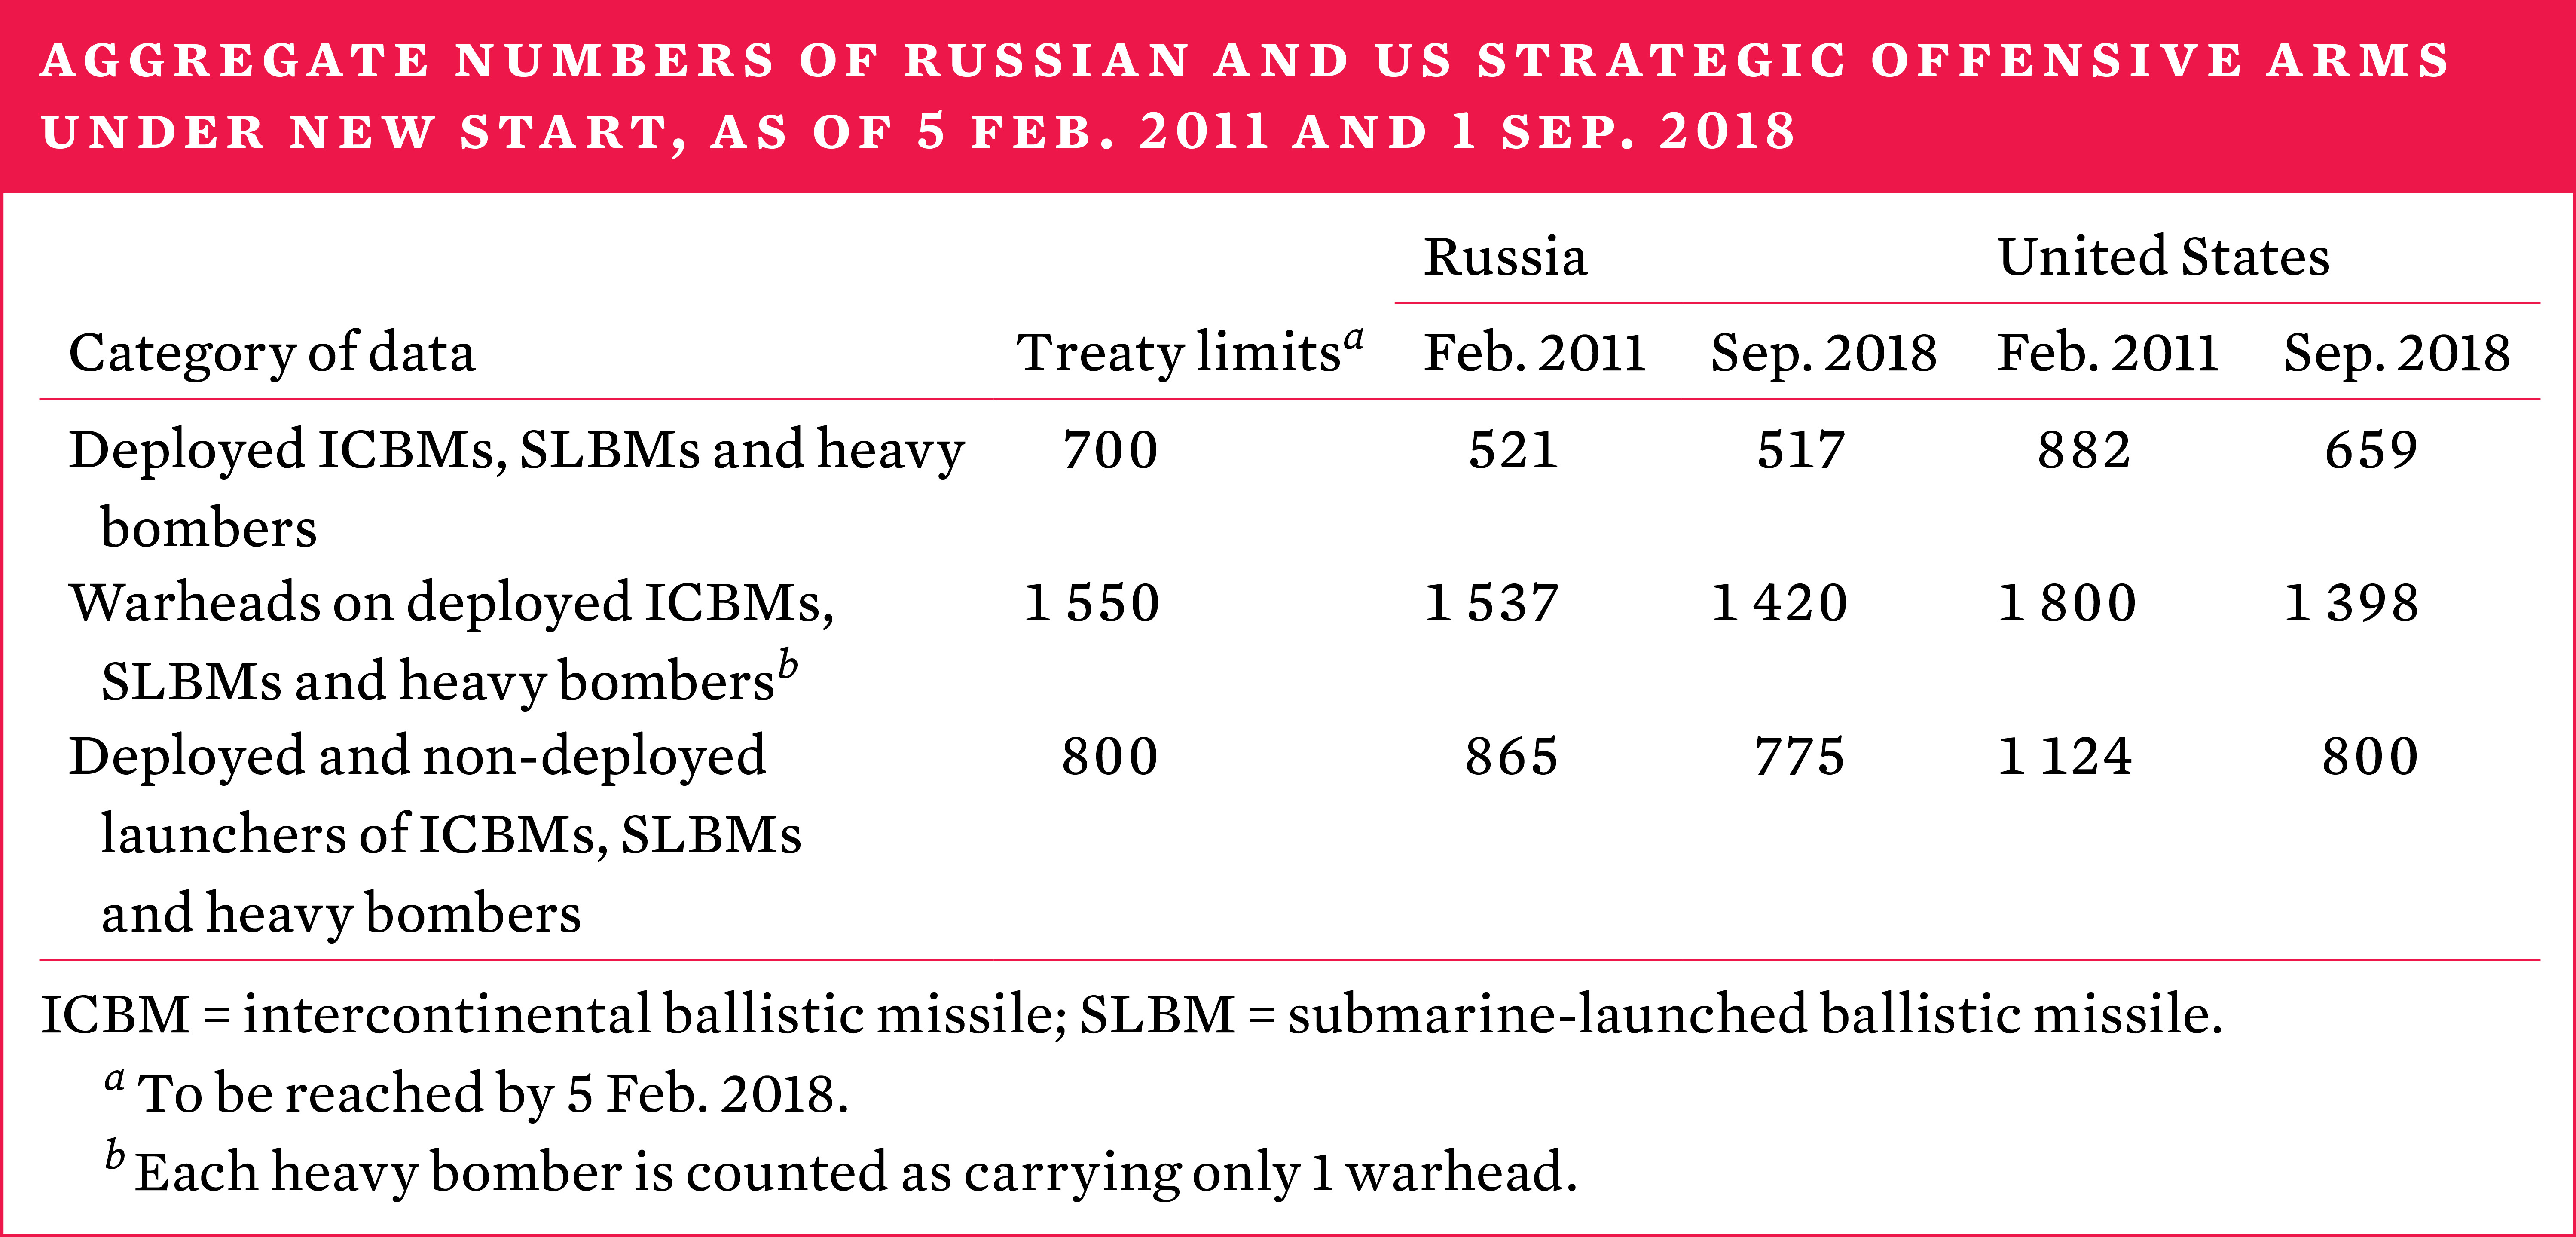 Aggregate number of Russian and US strategic offensive arms under new start, as of 5 Feb 2011 and 1 Sep 2018